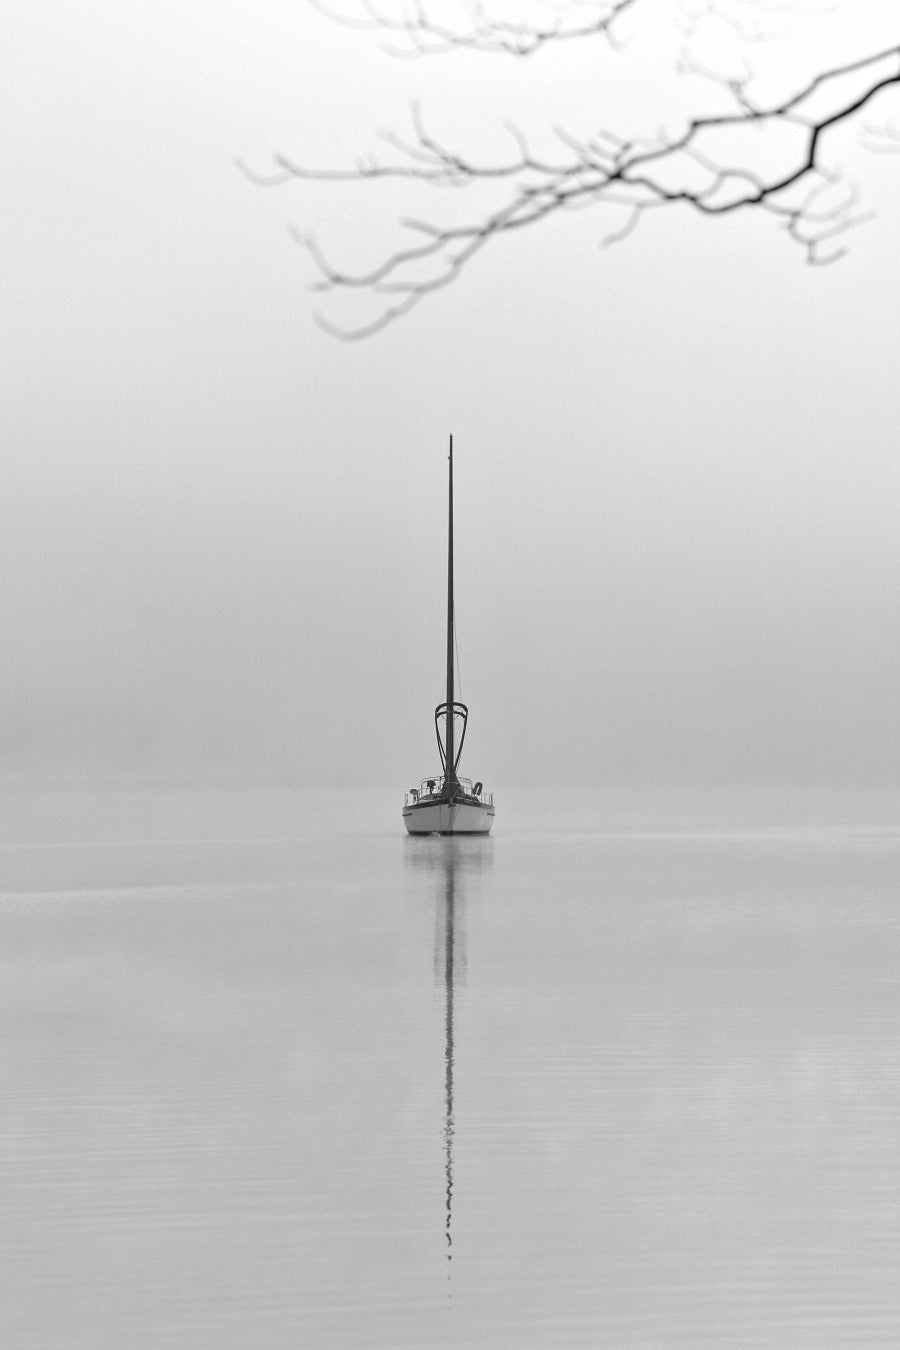 Sailboat on Winter Water